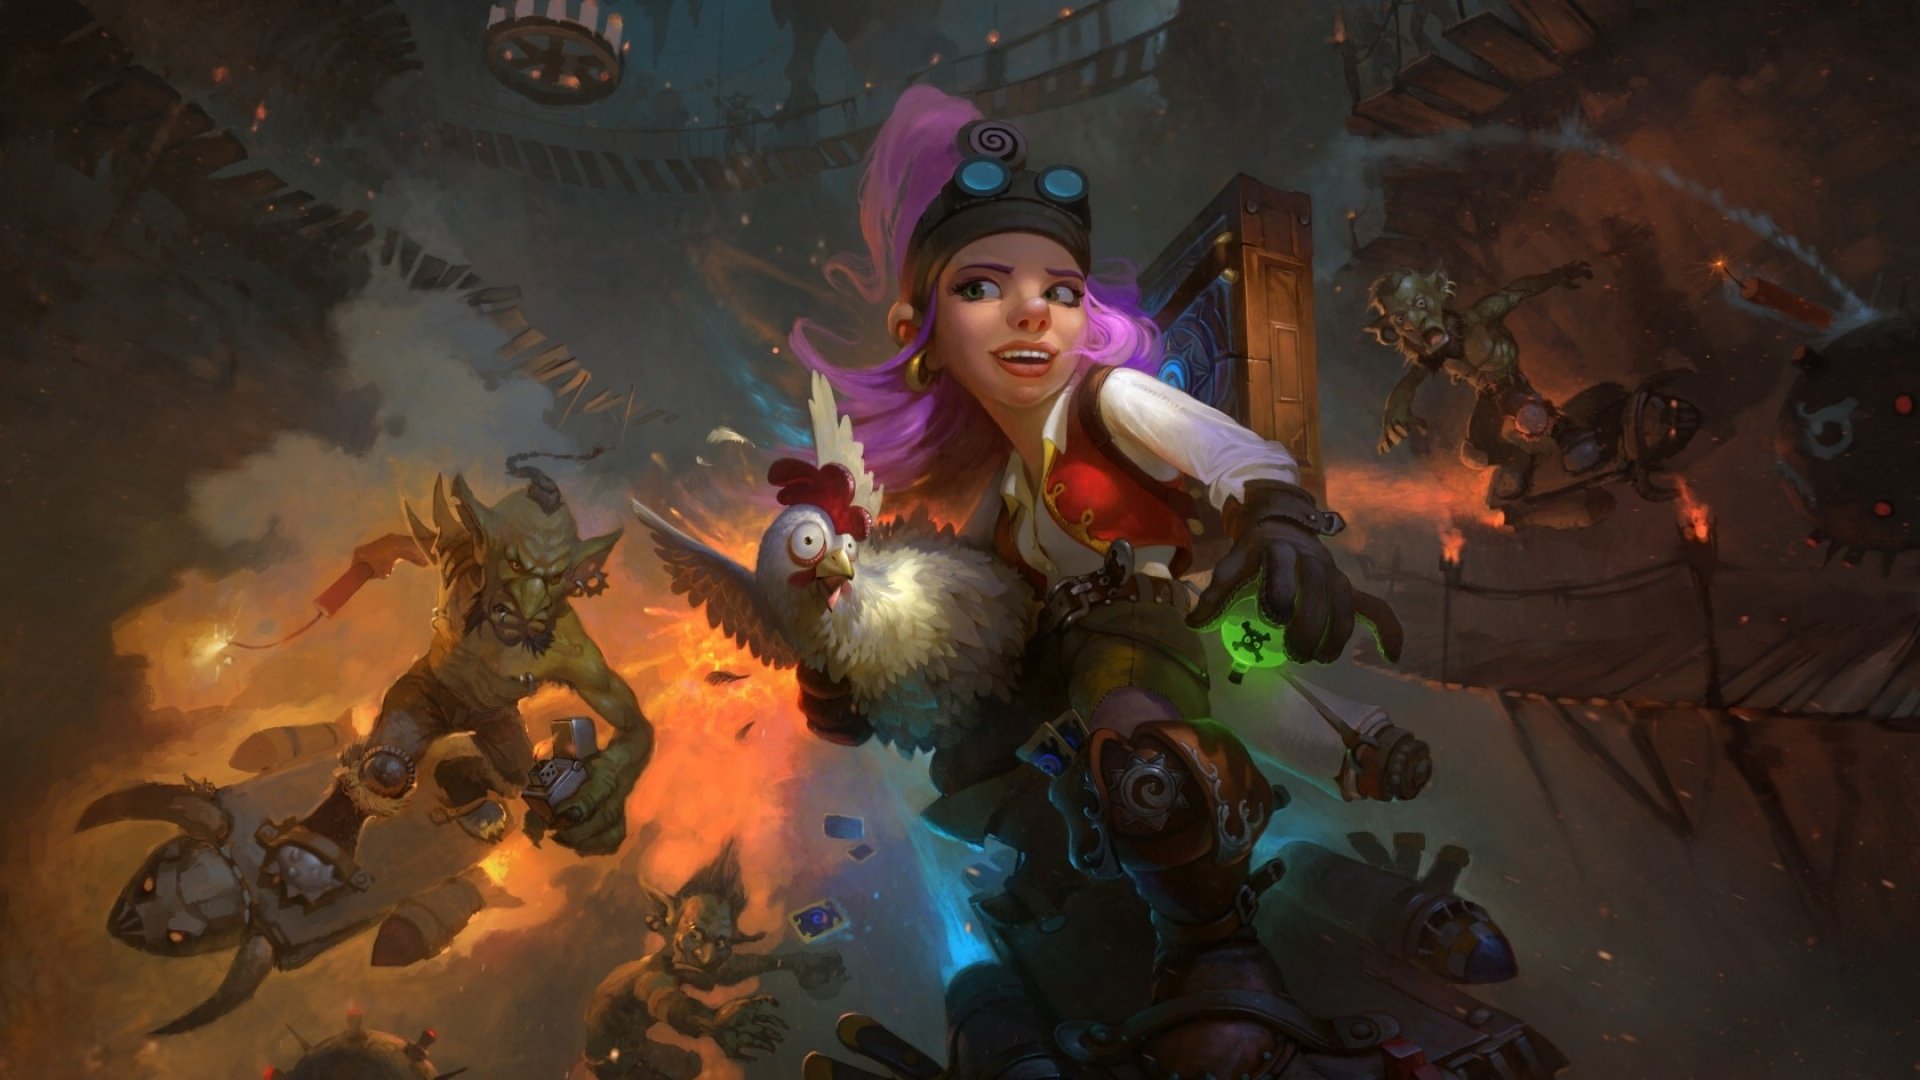 HD desktop wallpaper featuring a Hearthstone: Heroes of Warcraft character poised for action in a dynamic, fantasy-themed setting.